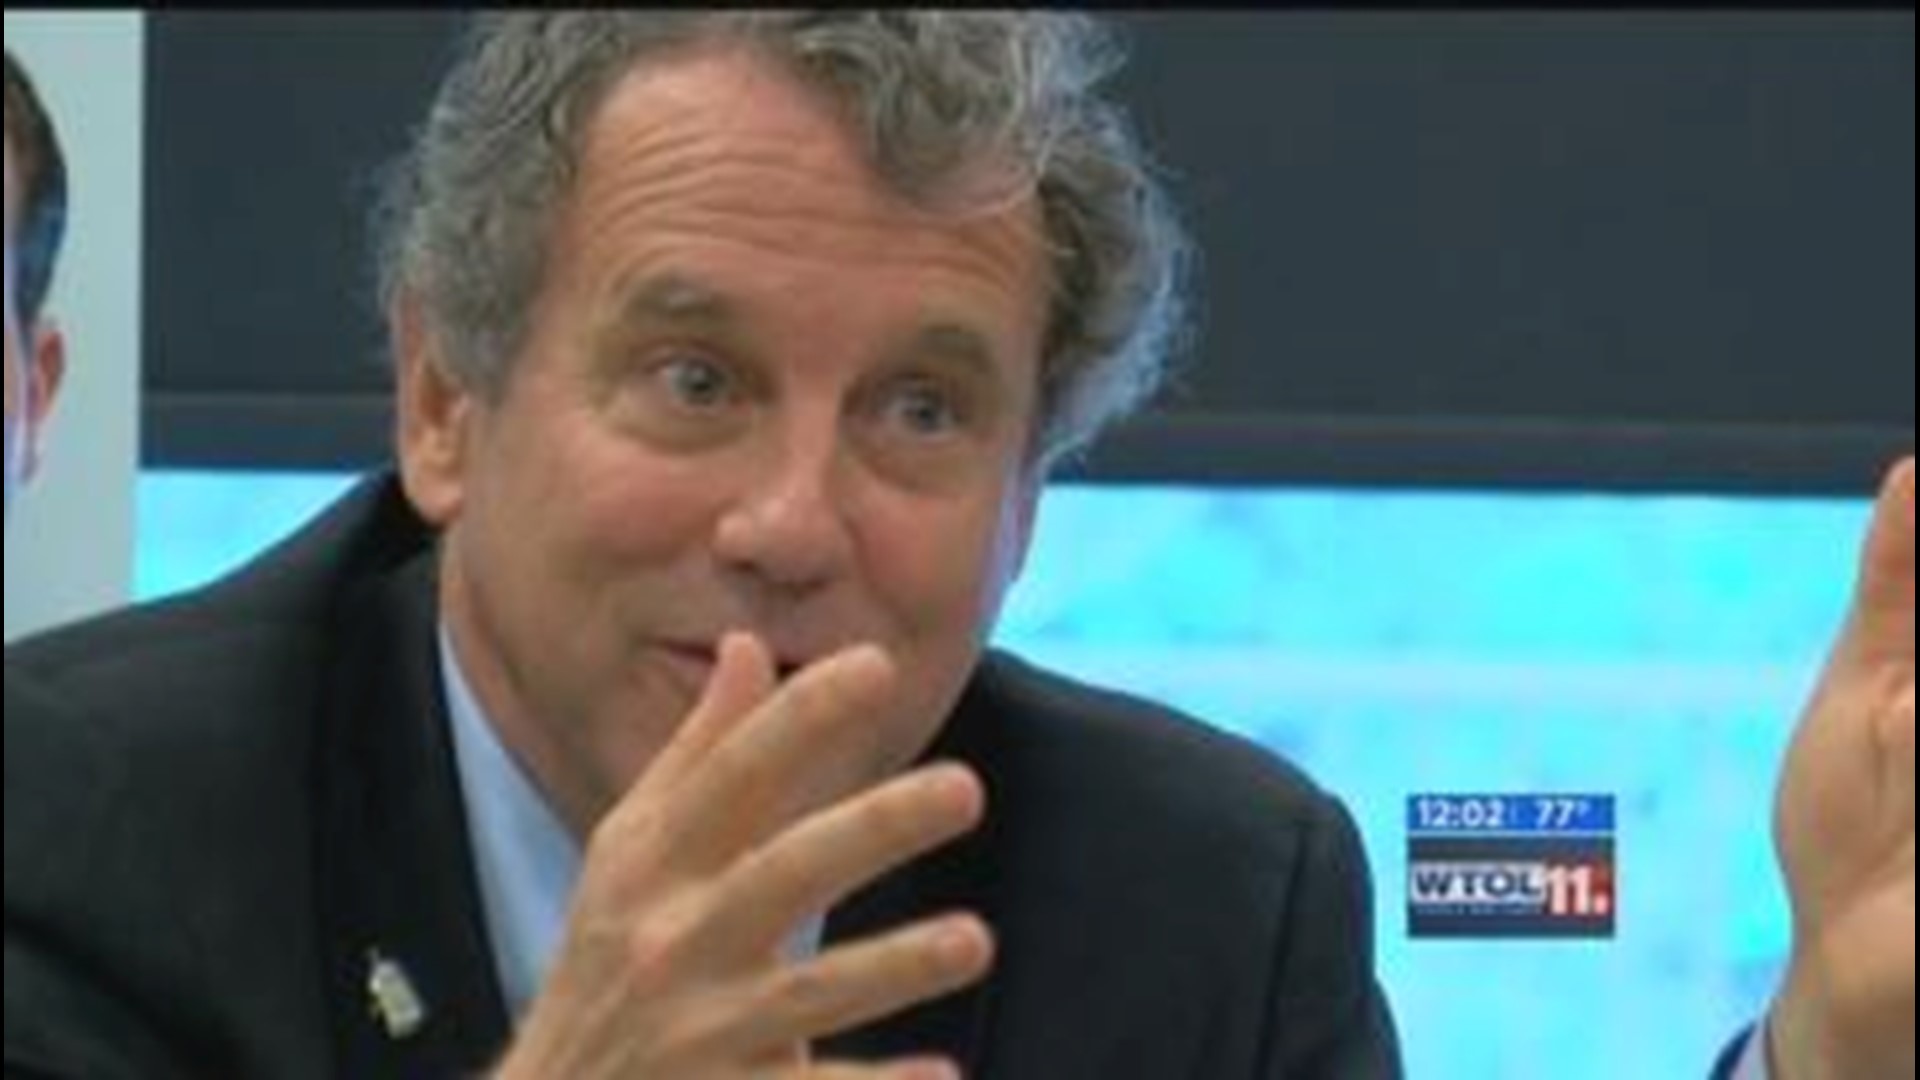 Sen. Sherrod Brown discusses Lake Erie issues with local business leaders